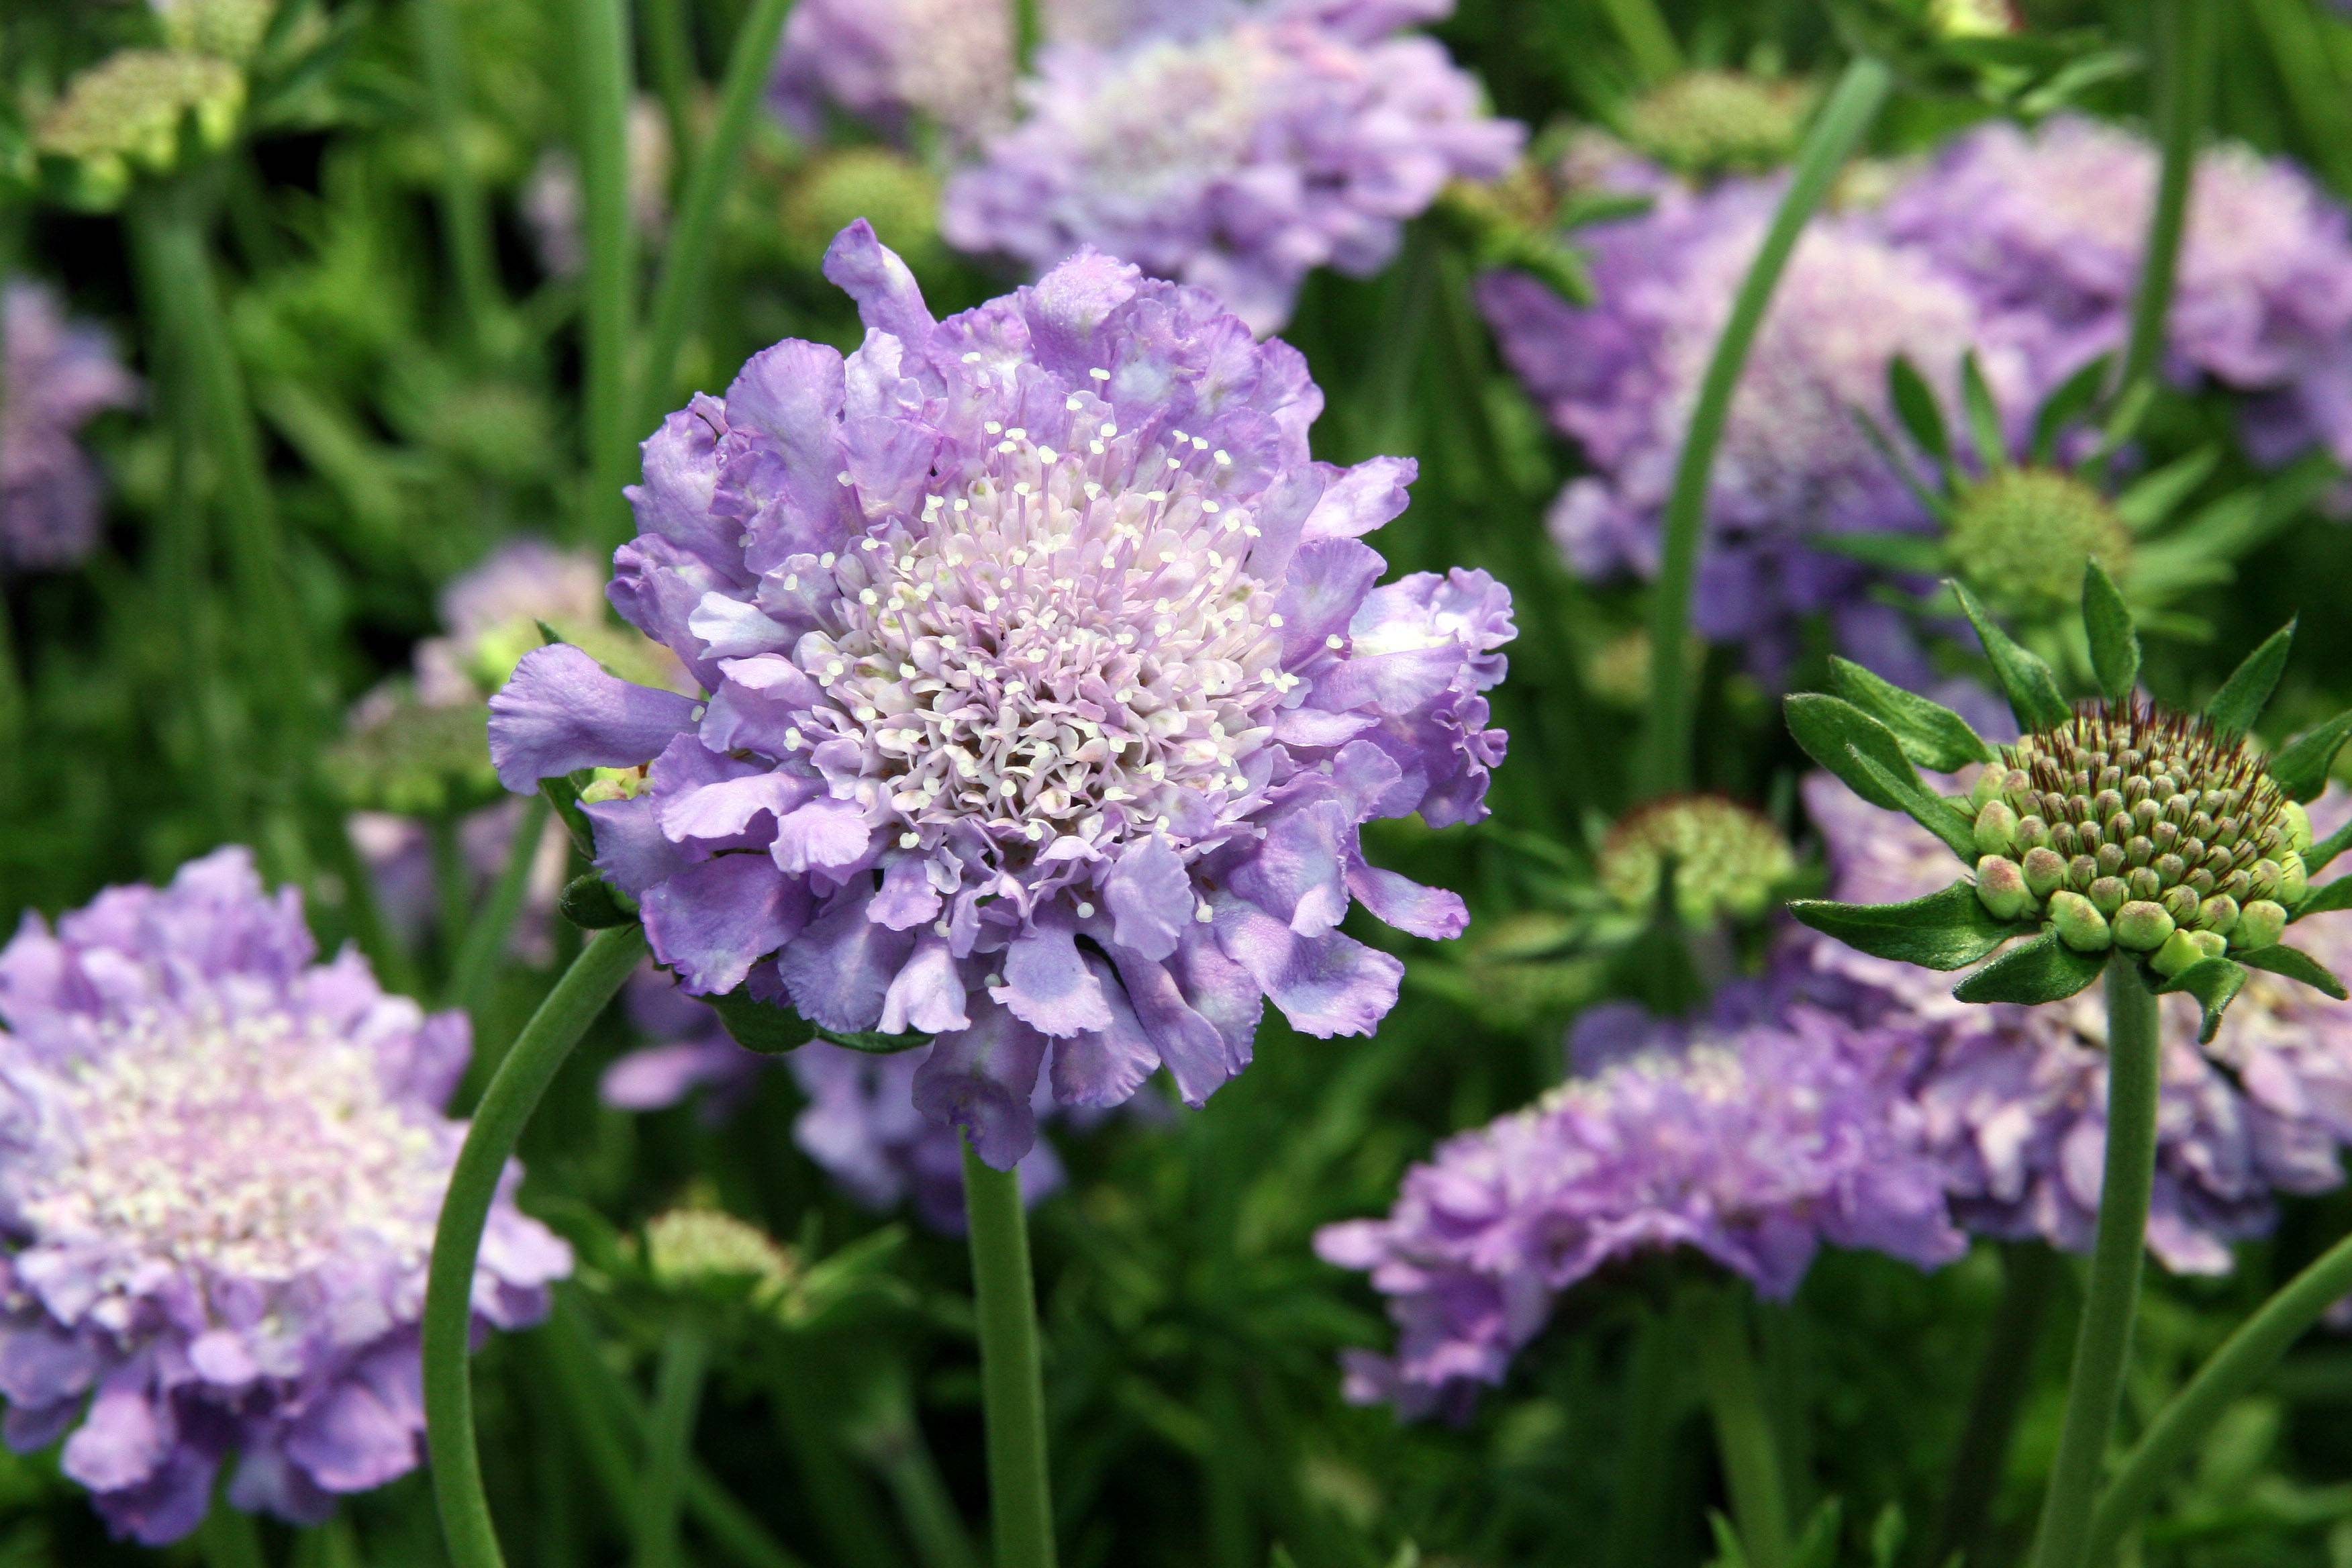 light-purple flowers with white-purple stamens, green leaves and stems